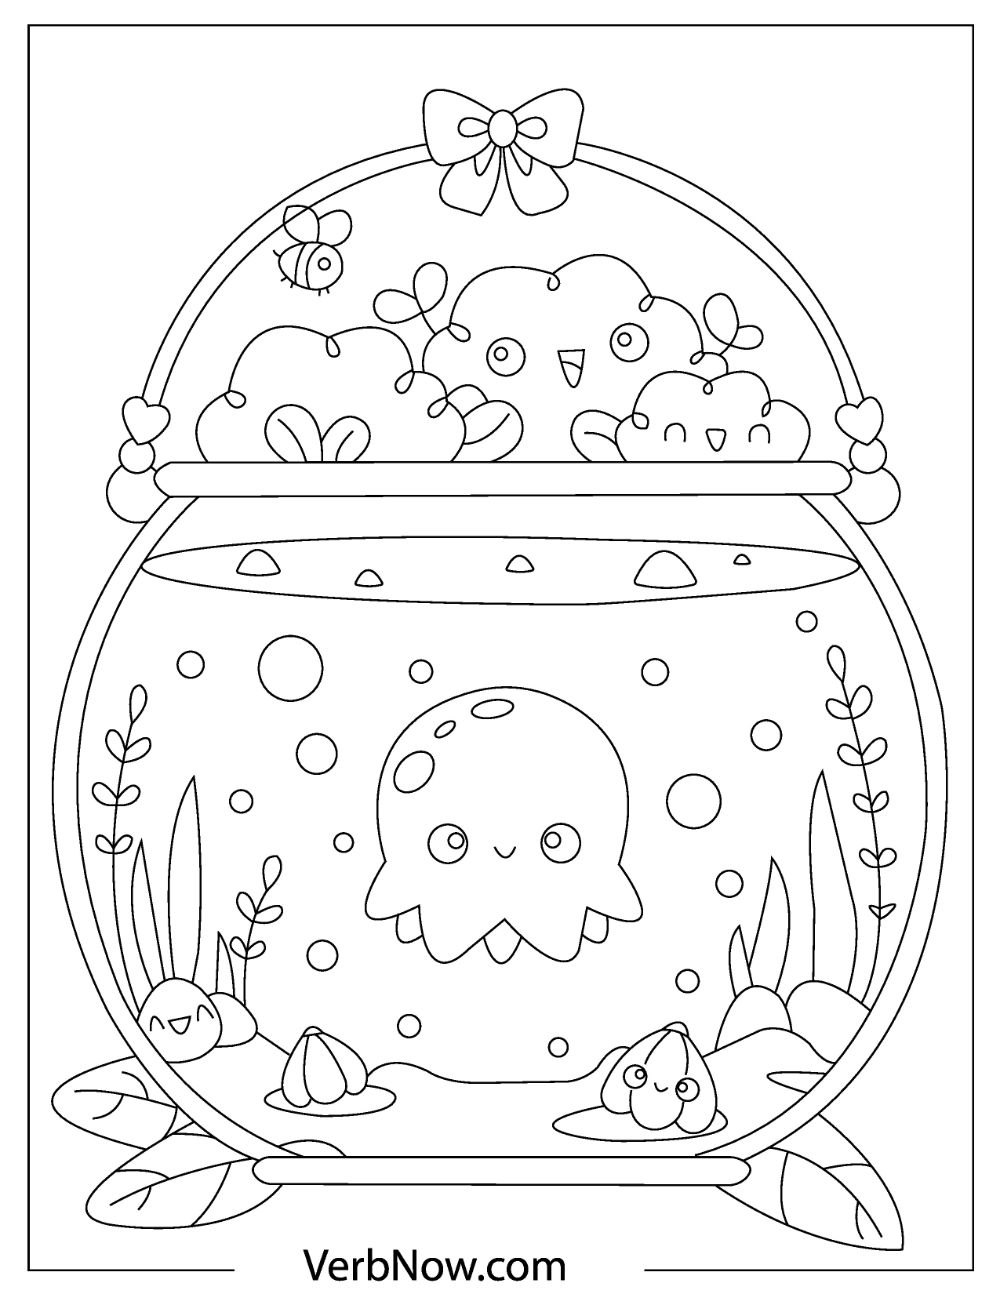 Free KAWAII Coloring Pages for Download (Printable PDF) - VerbNow